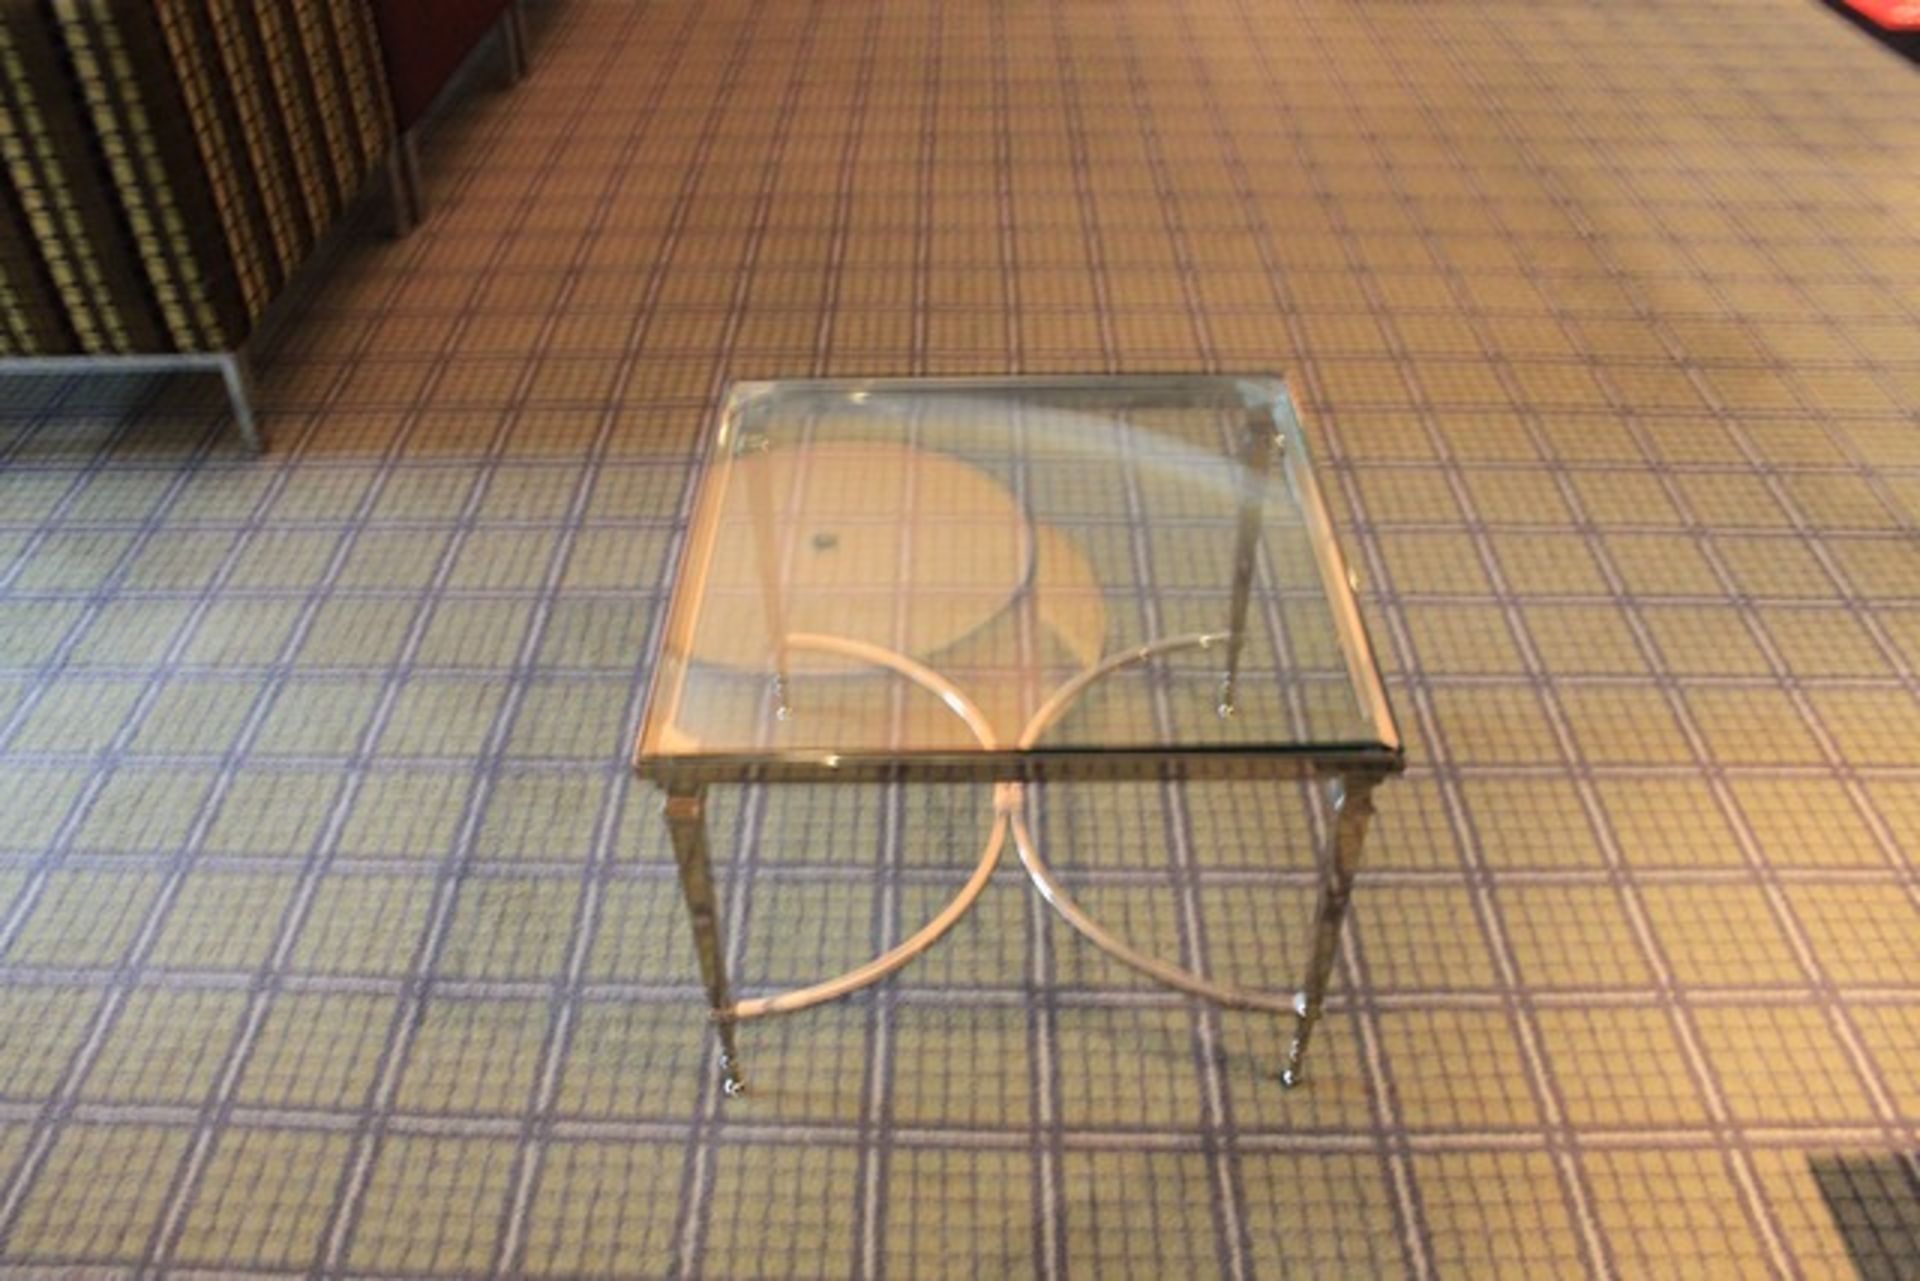 Chelsom Furniture Square Tempered Glass Table Polished Steel Base FSW/F10135 560 X 560 X 430mm - Image 2 of 4